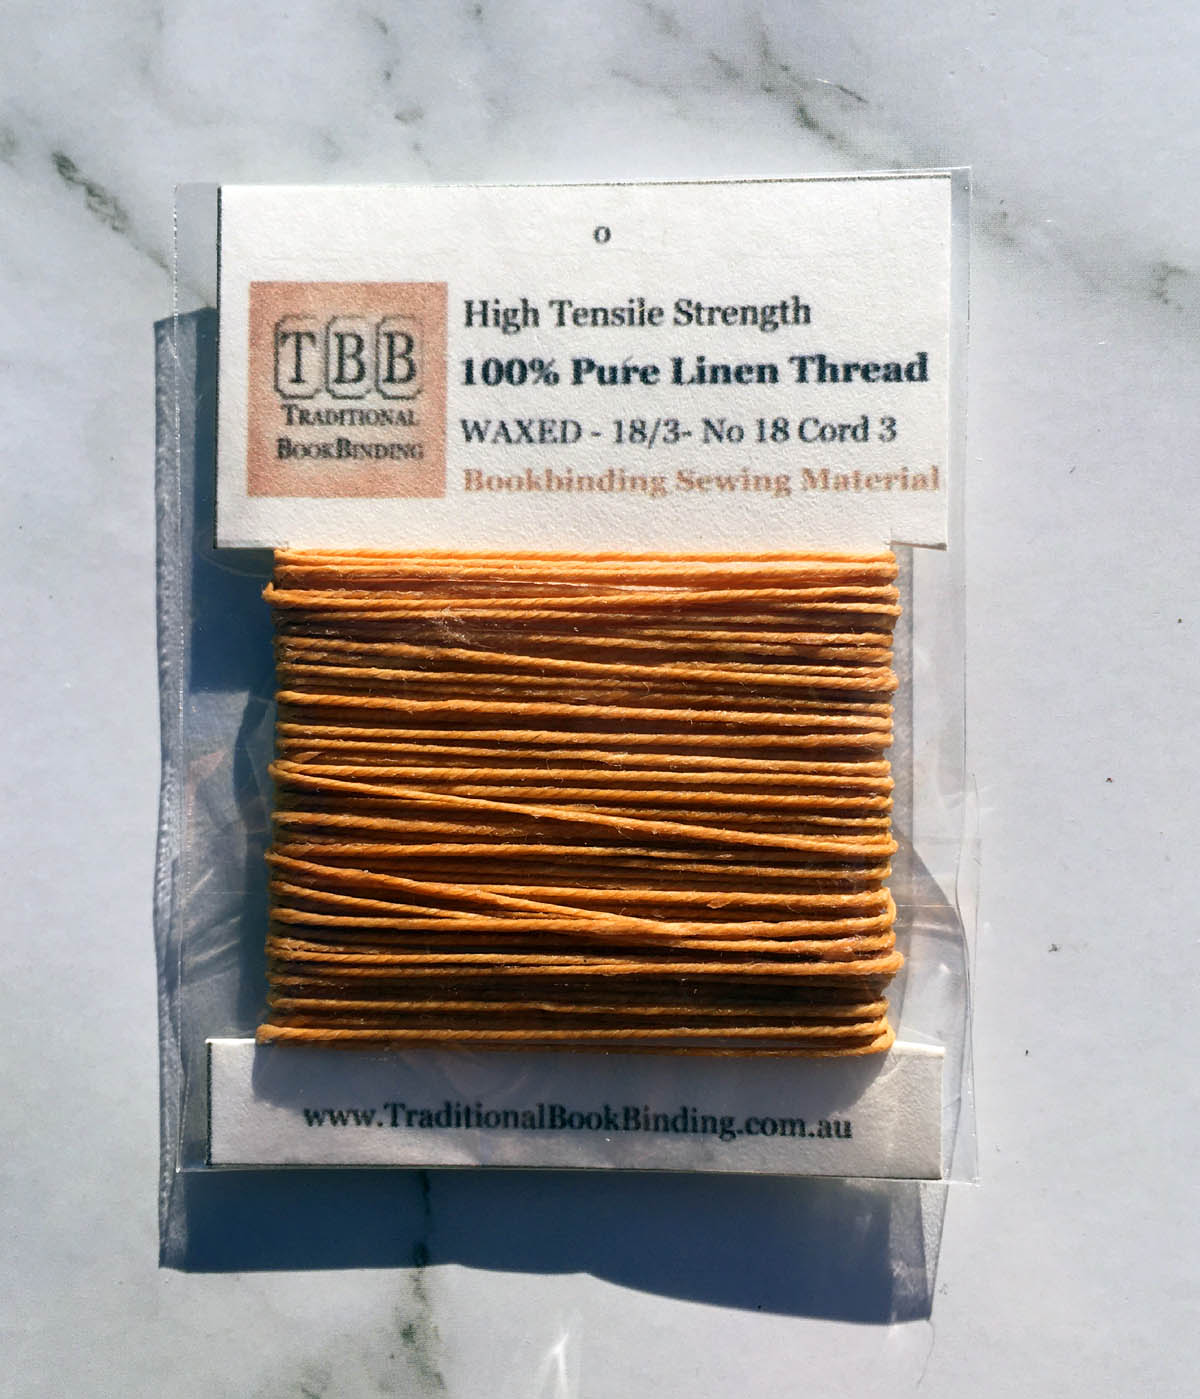 Yellow Ochre- 100% Pure Linen Thread- Waxed- 18/3 No.18 Cord 3- Approx 0.55mm thick